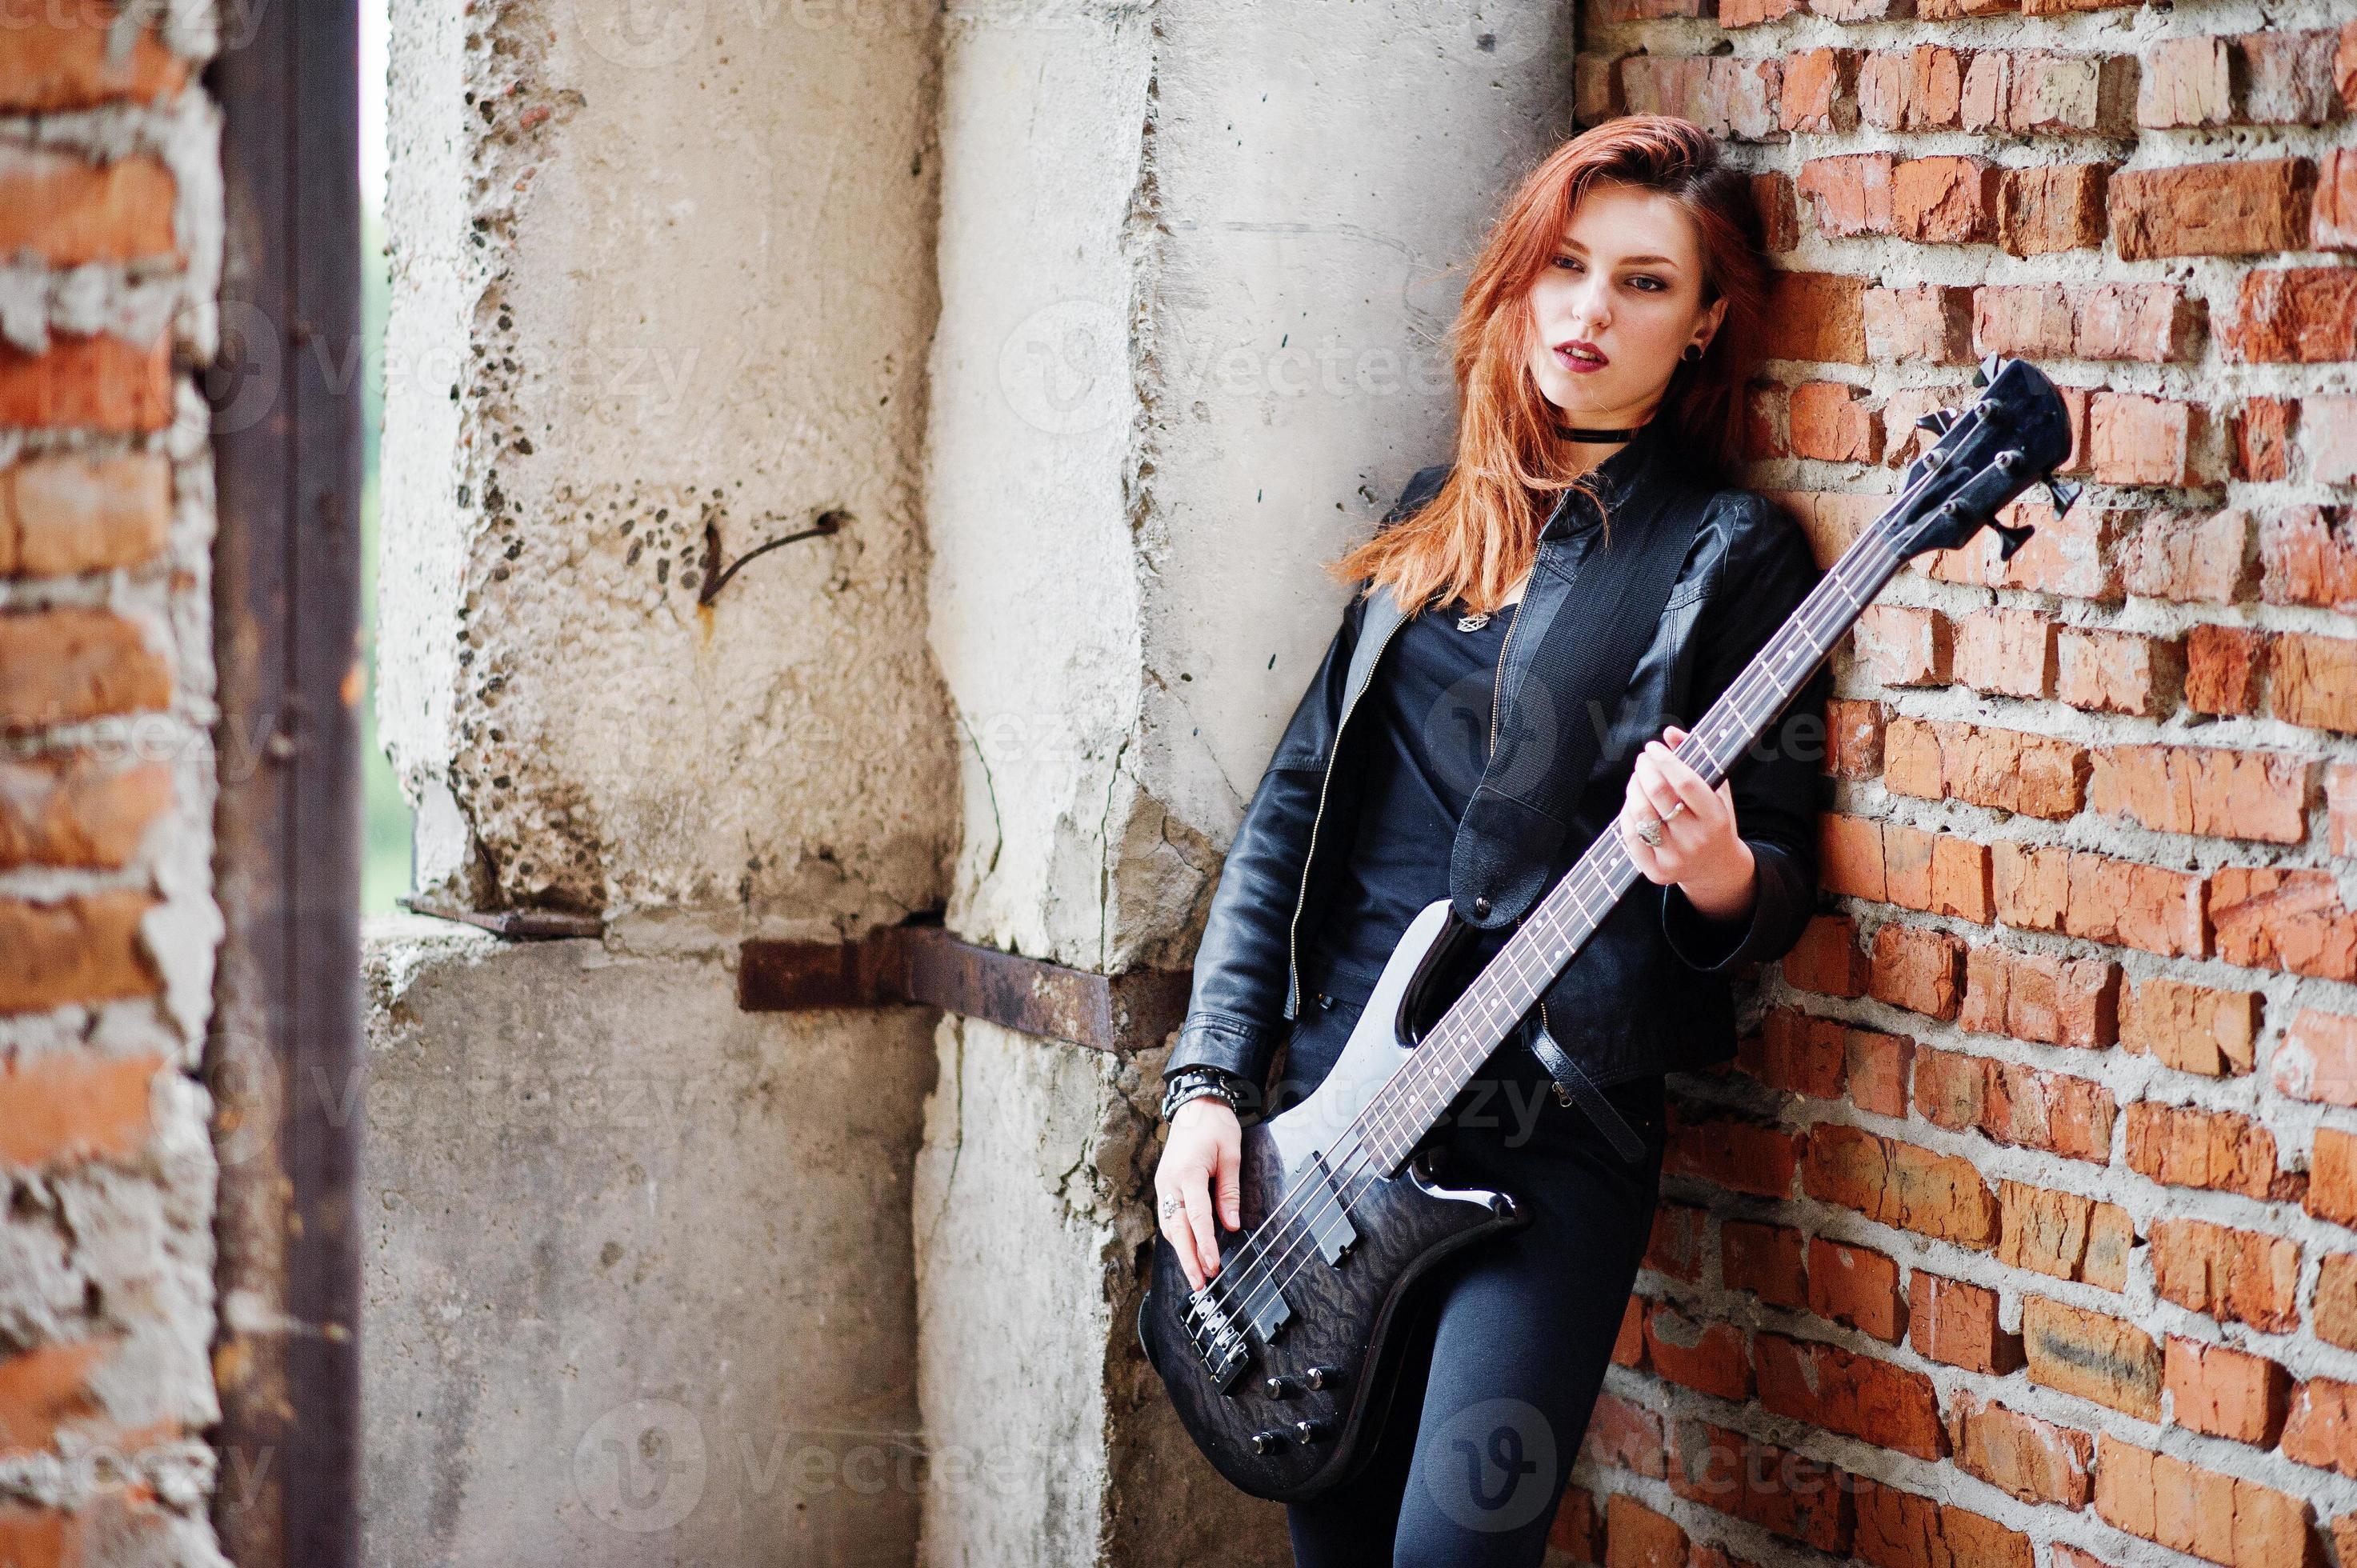 https://static.vecteezy.com/system/resources/previews/007/219/649/large_2x/red-haired-punk-girl-wear-on-black-with-bass-guitar-at-abadoned-place-portrait-of-gothic-woman-musician-photo.jpg